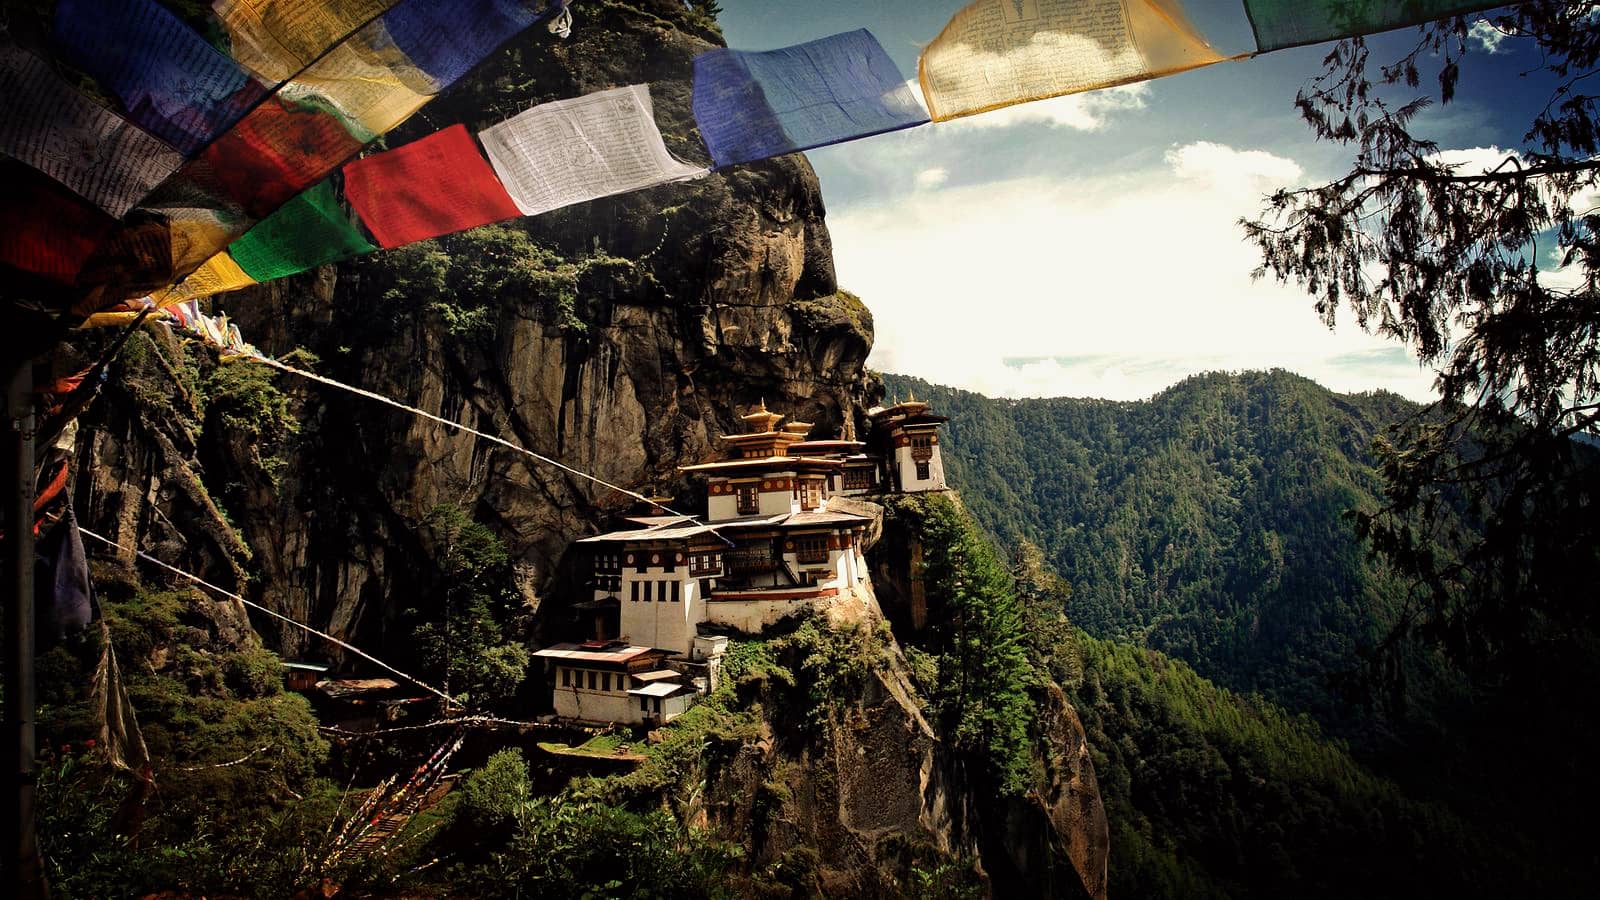 Himalayan kingdom with mystery and magic